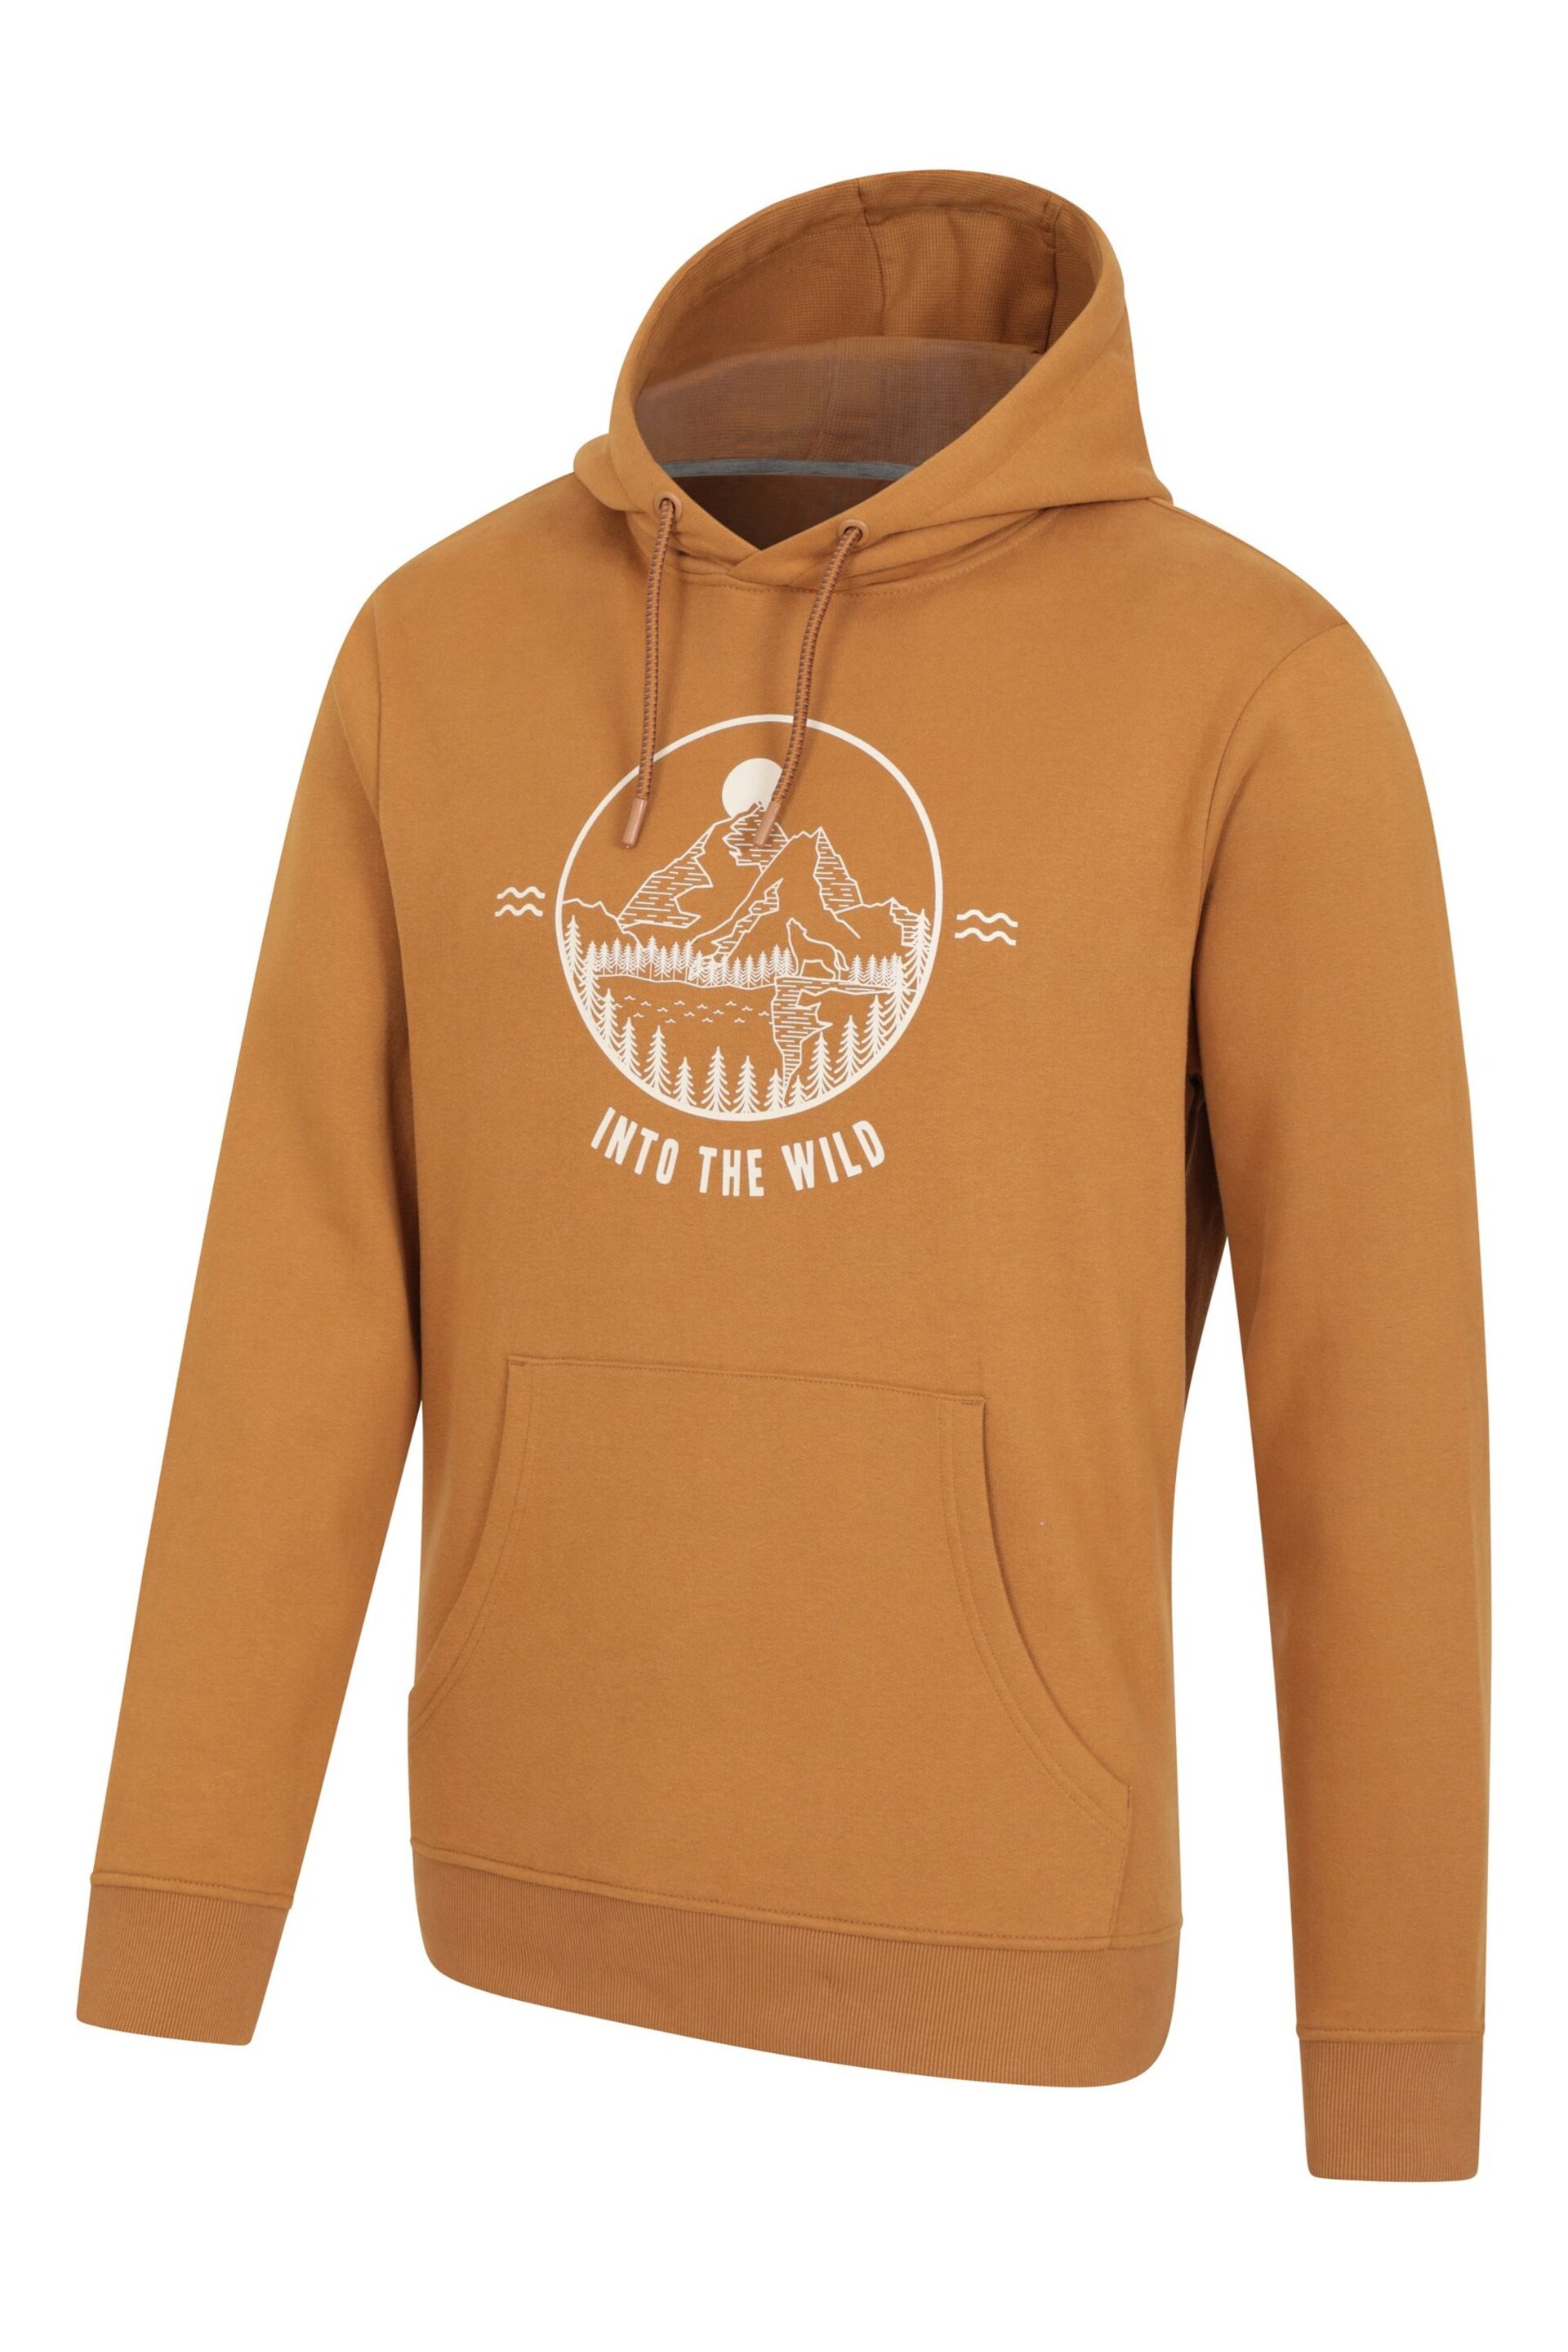 Mountain Warehouse Yellow Into The Wild Mens Hoodie - Image 5 of 6